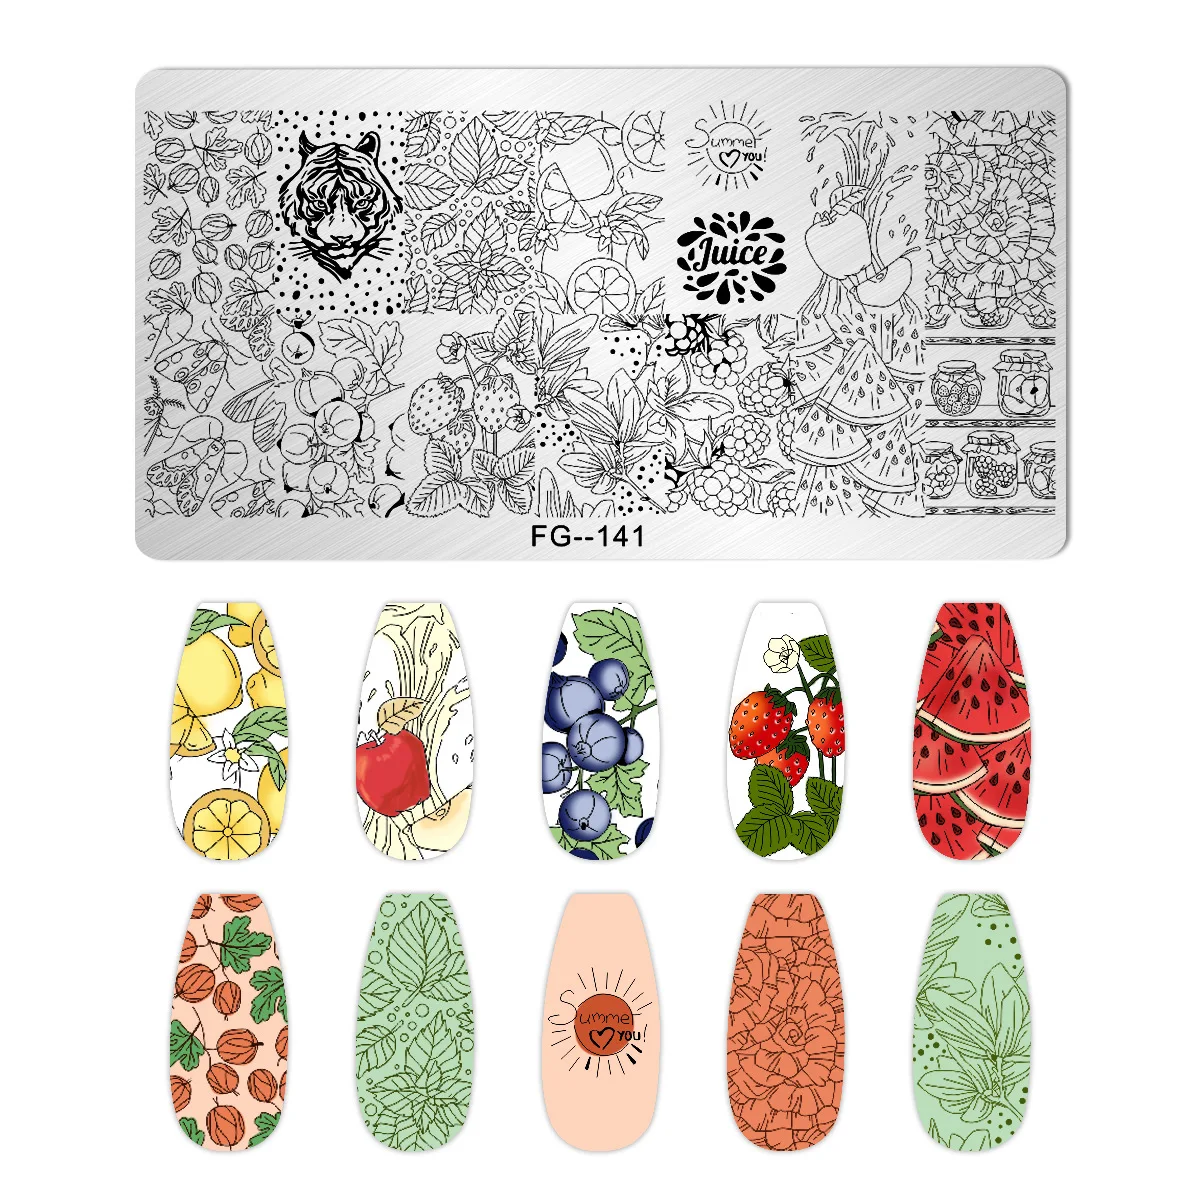 Various Fruit Nail Stamping Plate Lemon Watermelon Strawberry Pattern Design Nail Art Stamp Template Image Printing Stencil Tool images - 6